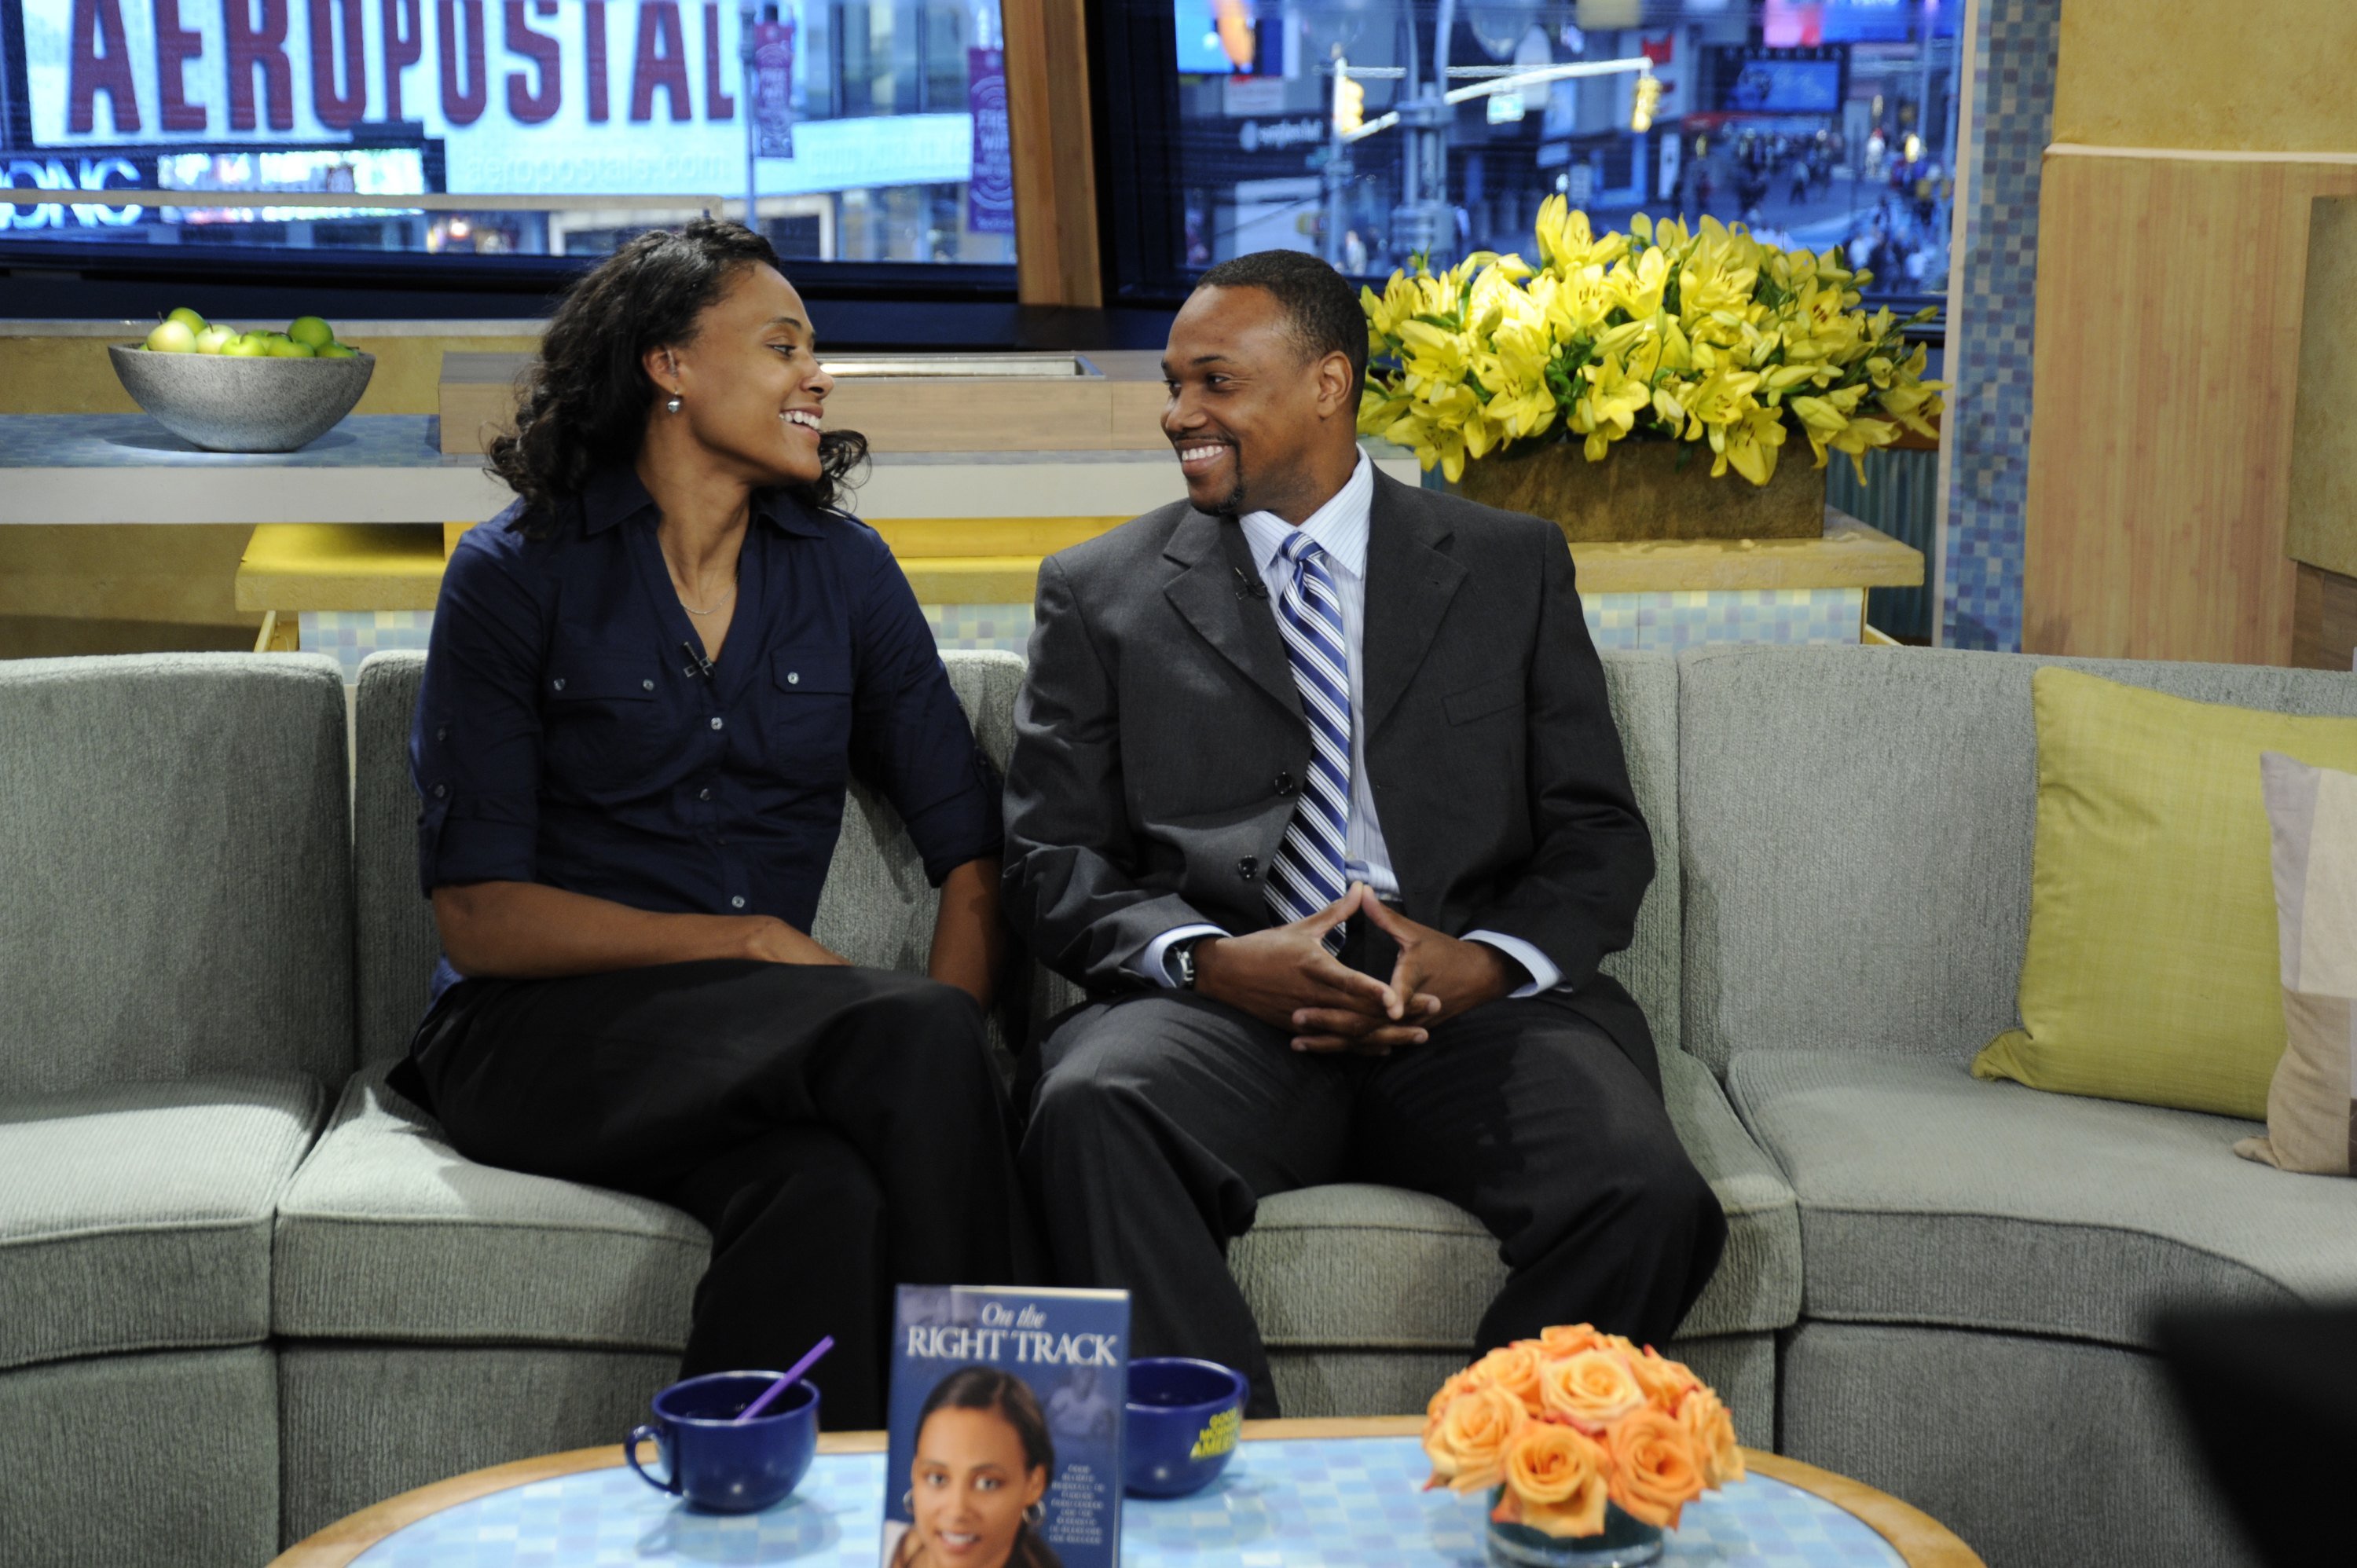 Marion Jones talks about her new book, "On the Right Track," with her husband Obadele Thompson on "Good Morning America" on October 26, 2010 | Photo: Donna Svennevik/Disney General Entertainment Content/Getty Images